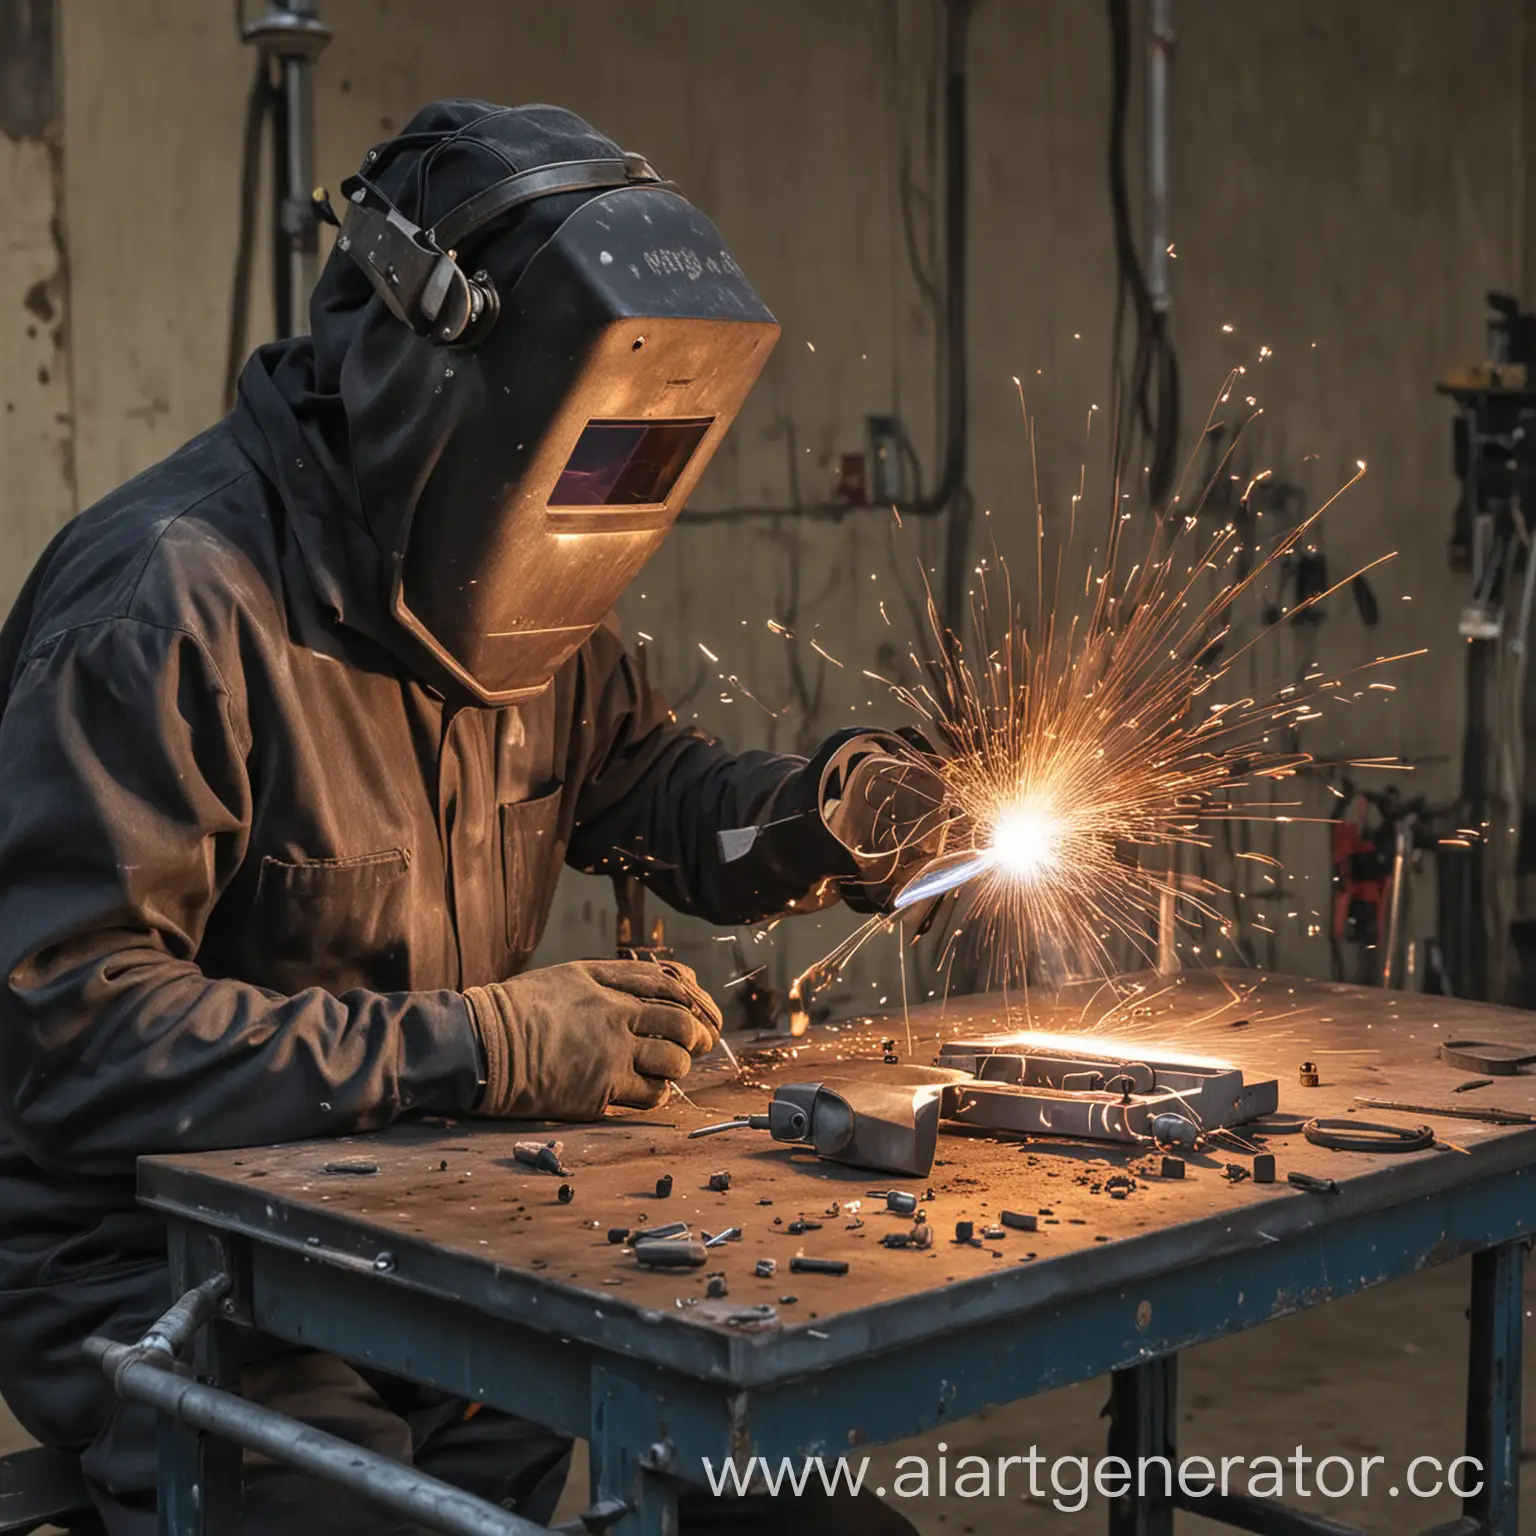 Professional-Welding-Apparatus-in-Action